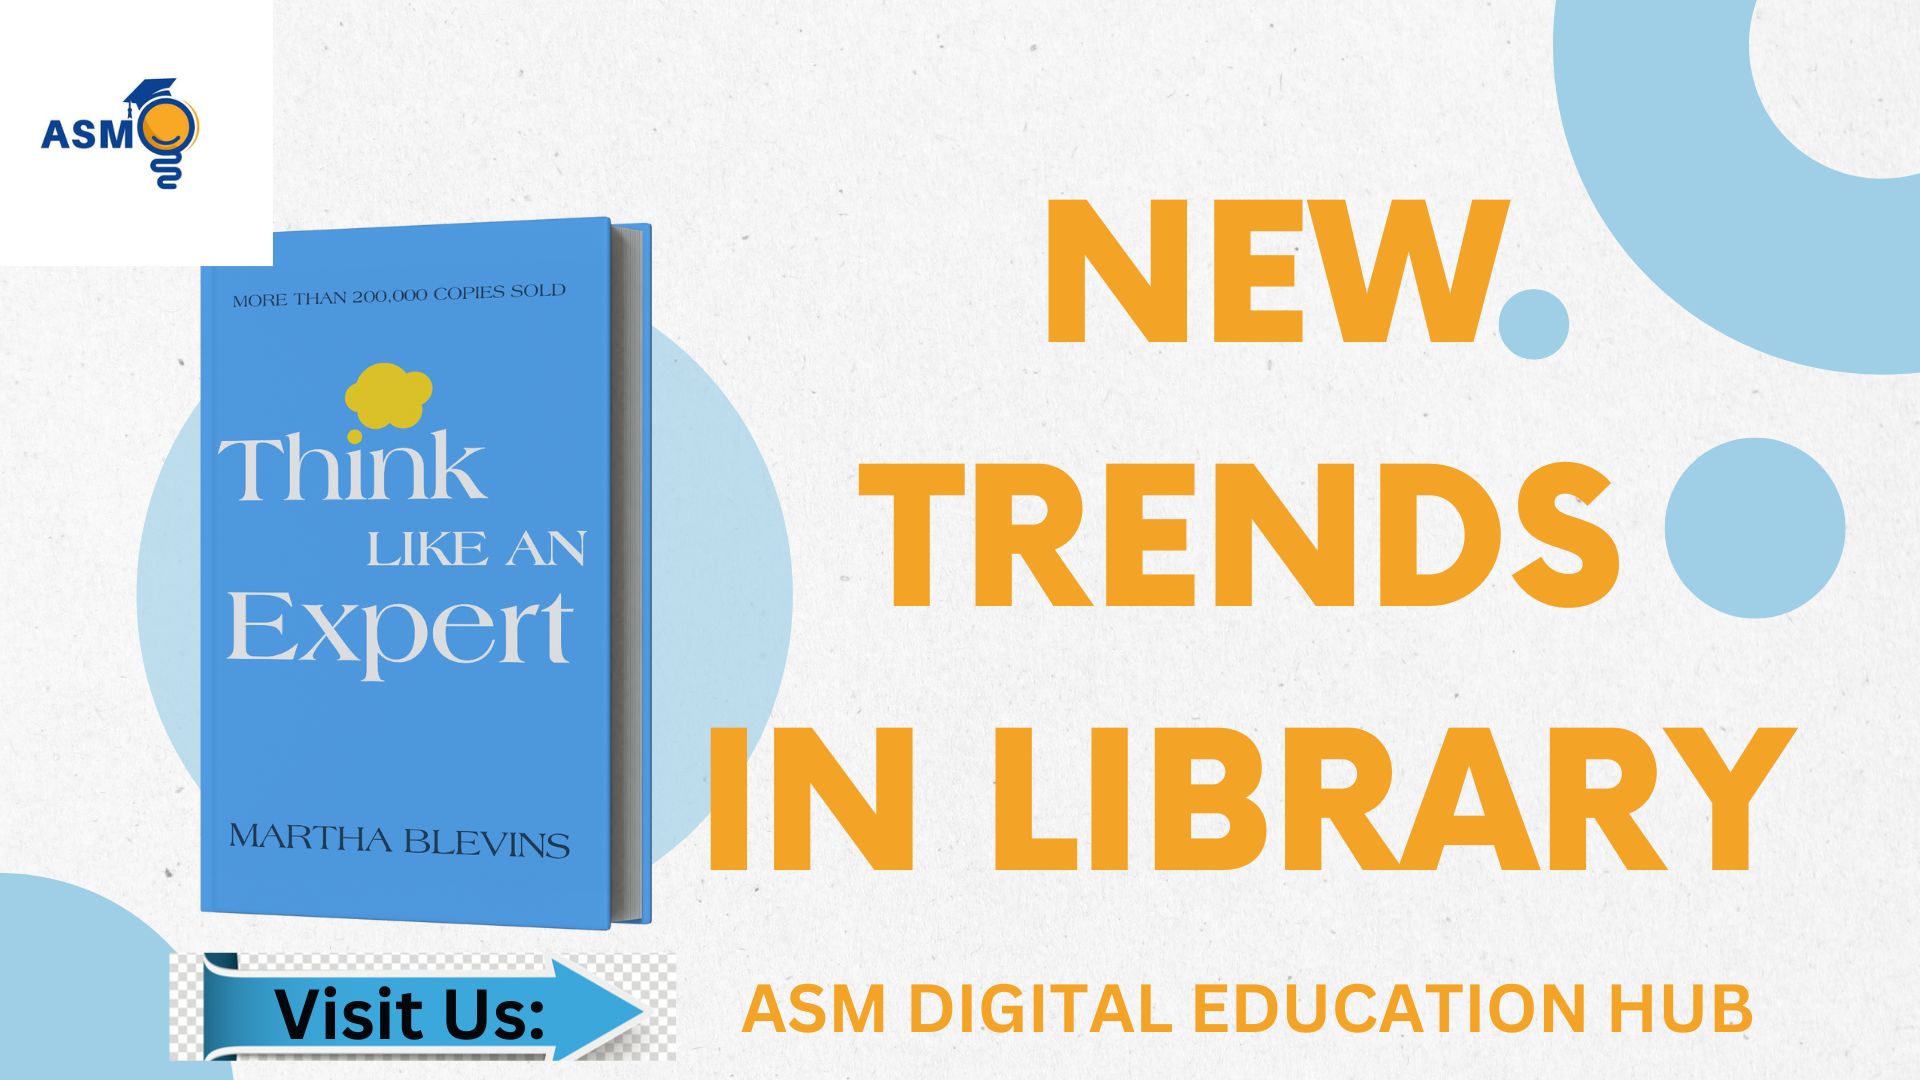 Library technology trends 2024, Digital transformation in libraries, AI in libraries, Library automation tools, Innovative library technologies, Future of libraries, Smart libraries, Library management systems, Virtual reality in libraries, Library tech innovations